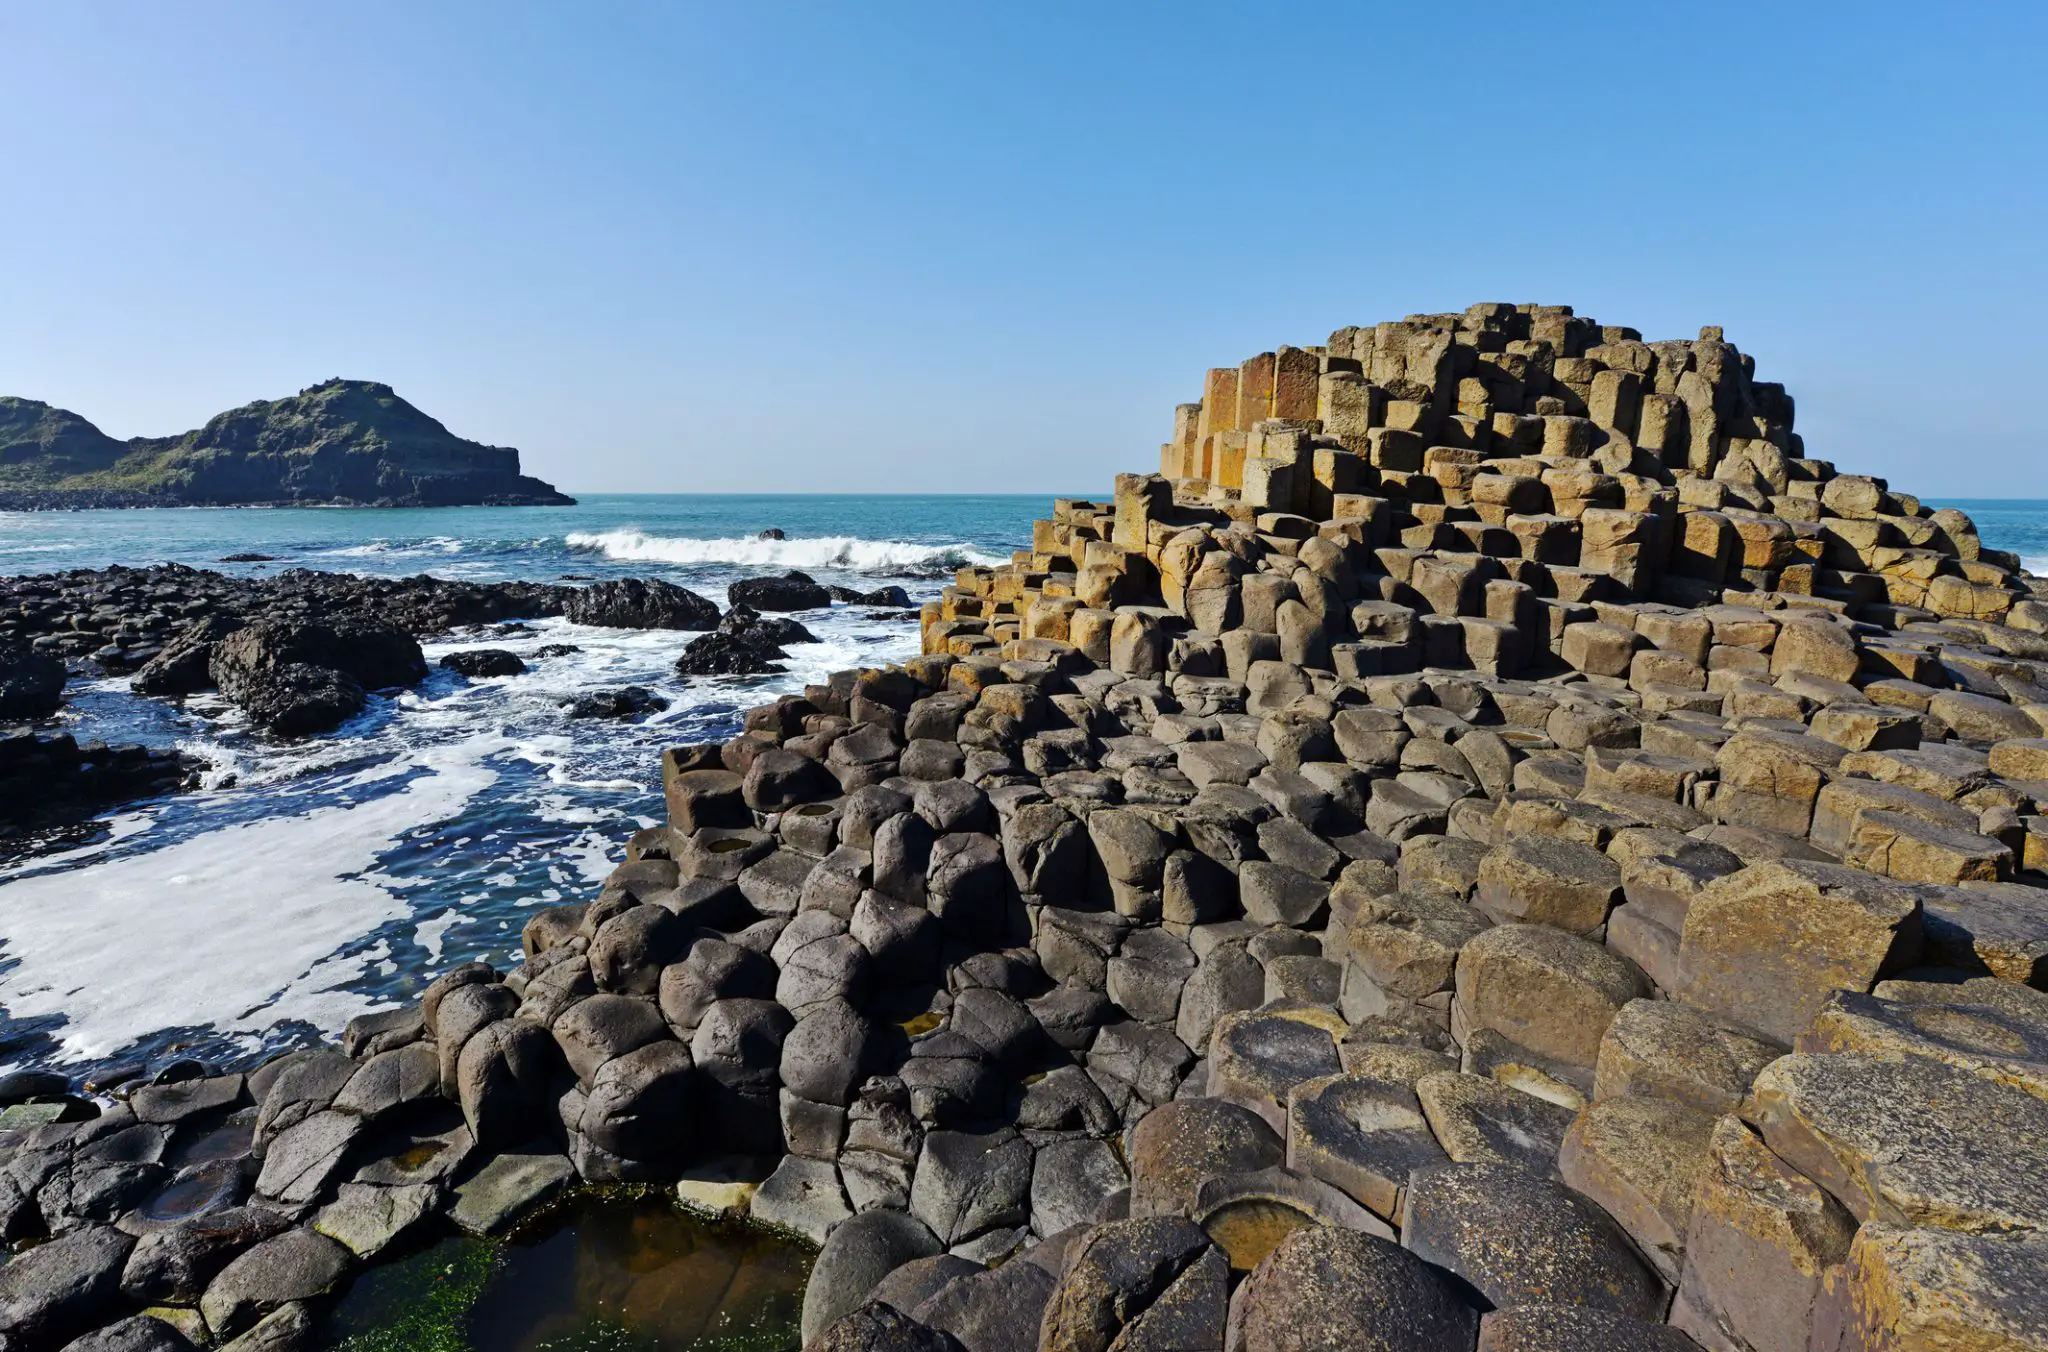 Why is Giant’s Causeway so magical?